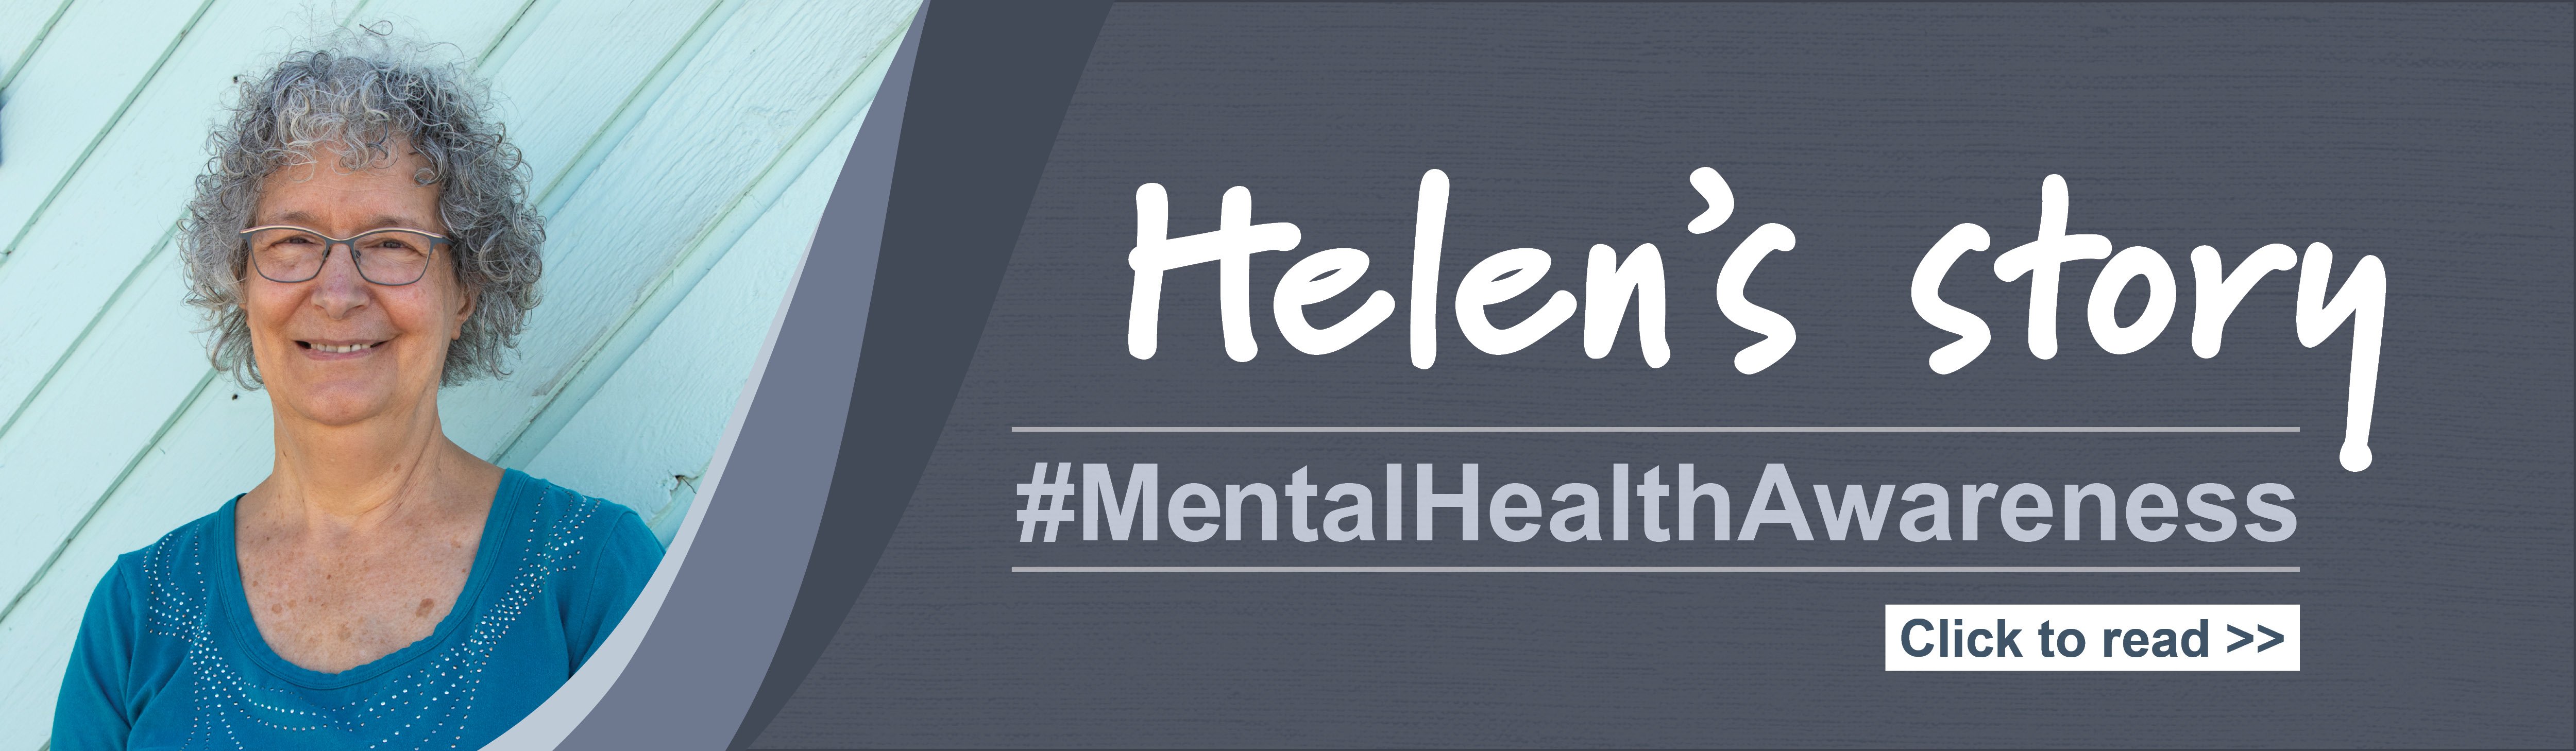 Graphic about Helen's Story, promoting Mental Health Awareness. Click to read.